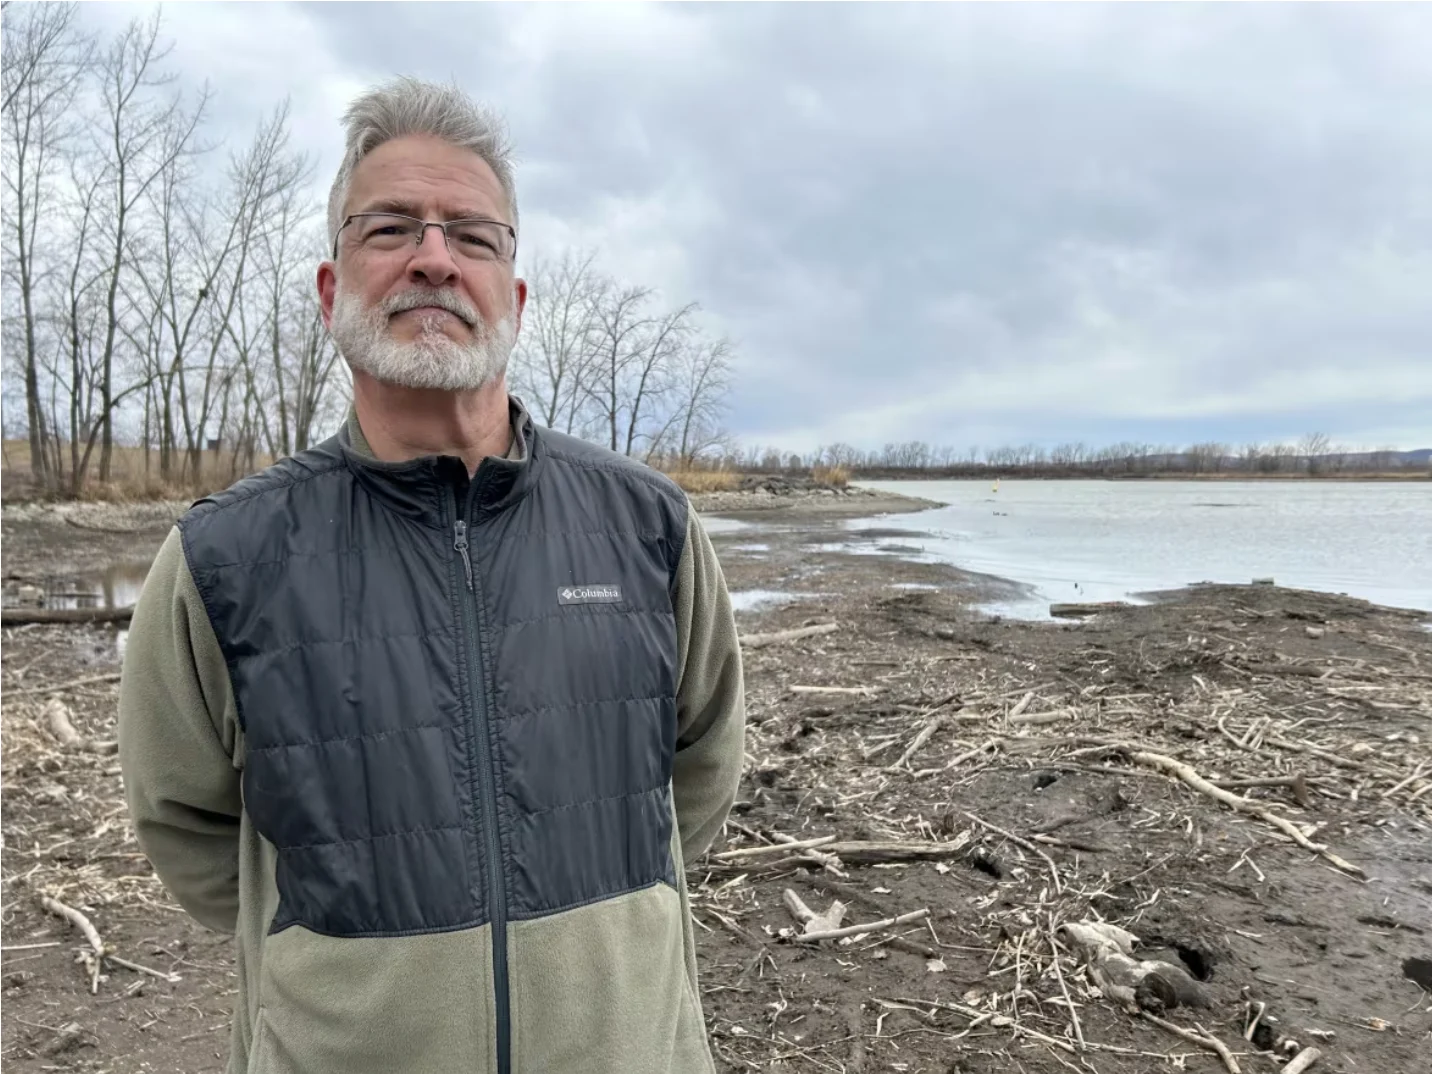 cbc: Biologist and president of Vigile Verte says he's in discussion with federal oceans authorities to see if the water level can be lowered in such a way that doesn't interfere with the health of aquatic ecosystems in the La Prairie Basin. (Rowan Kennedy/CBC)